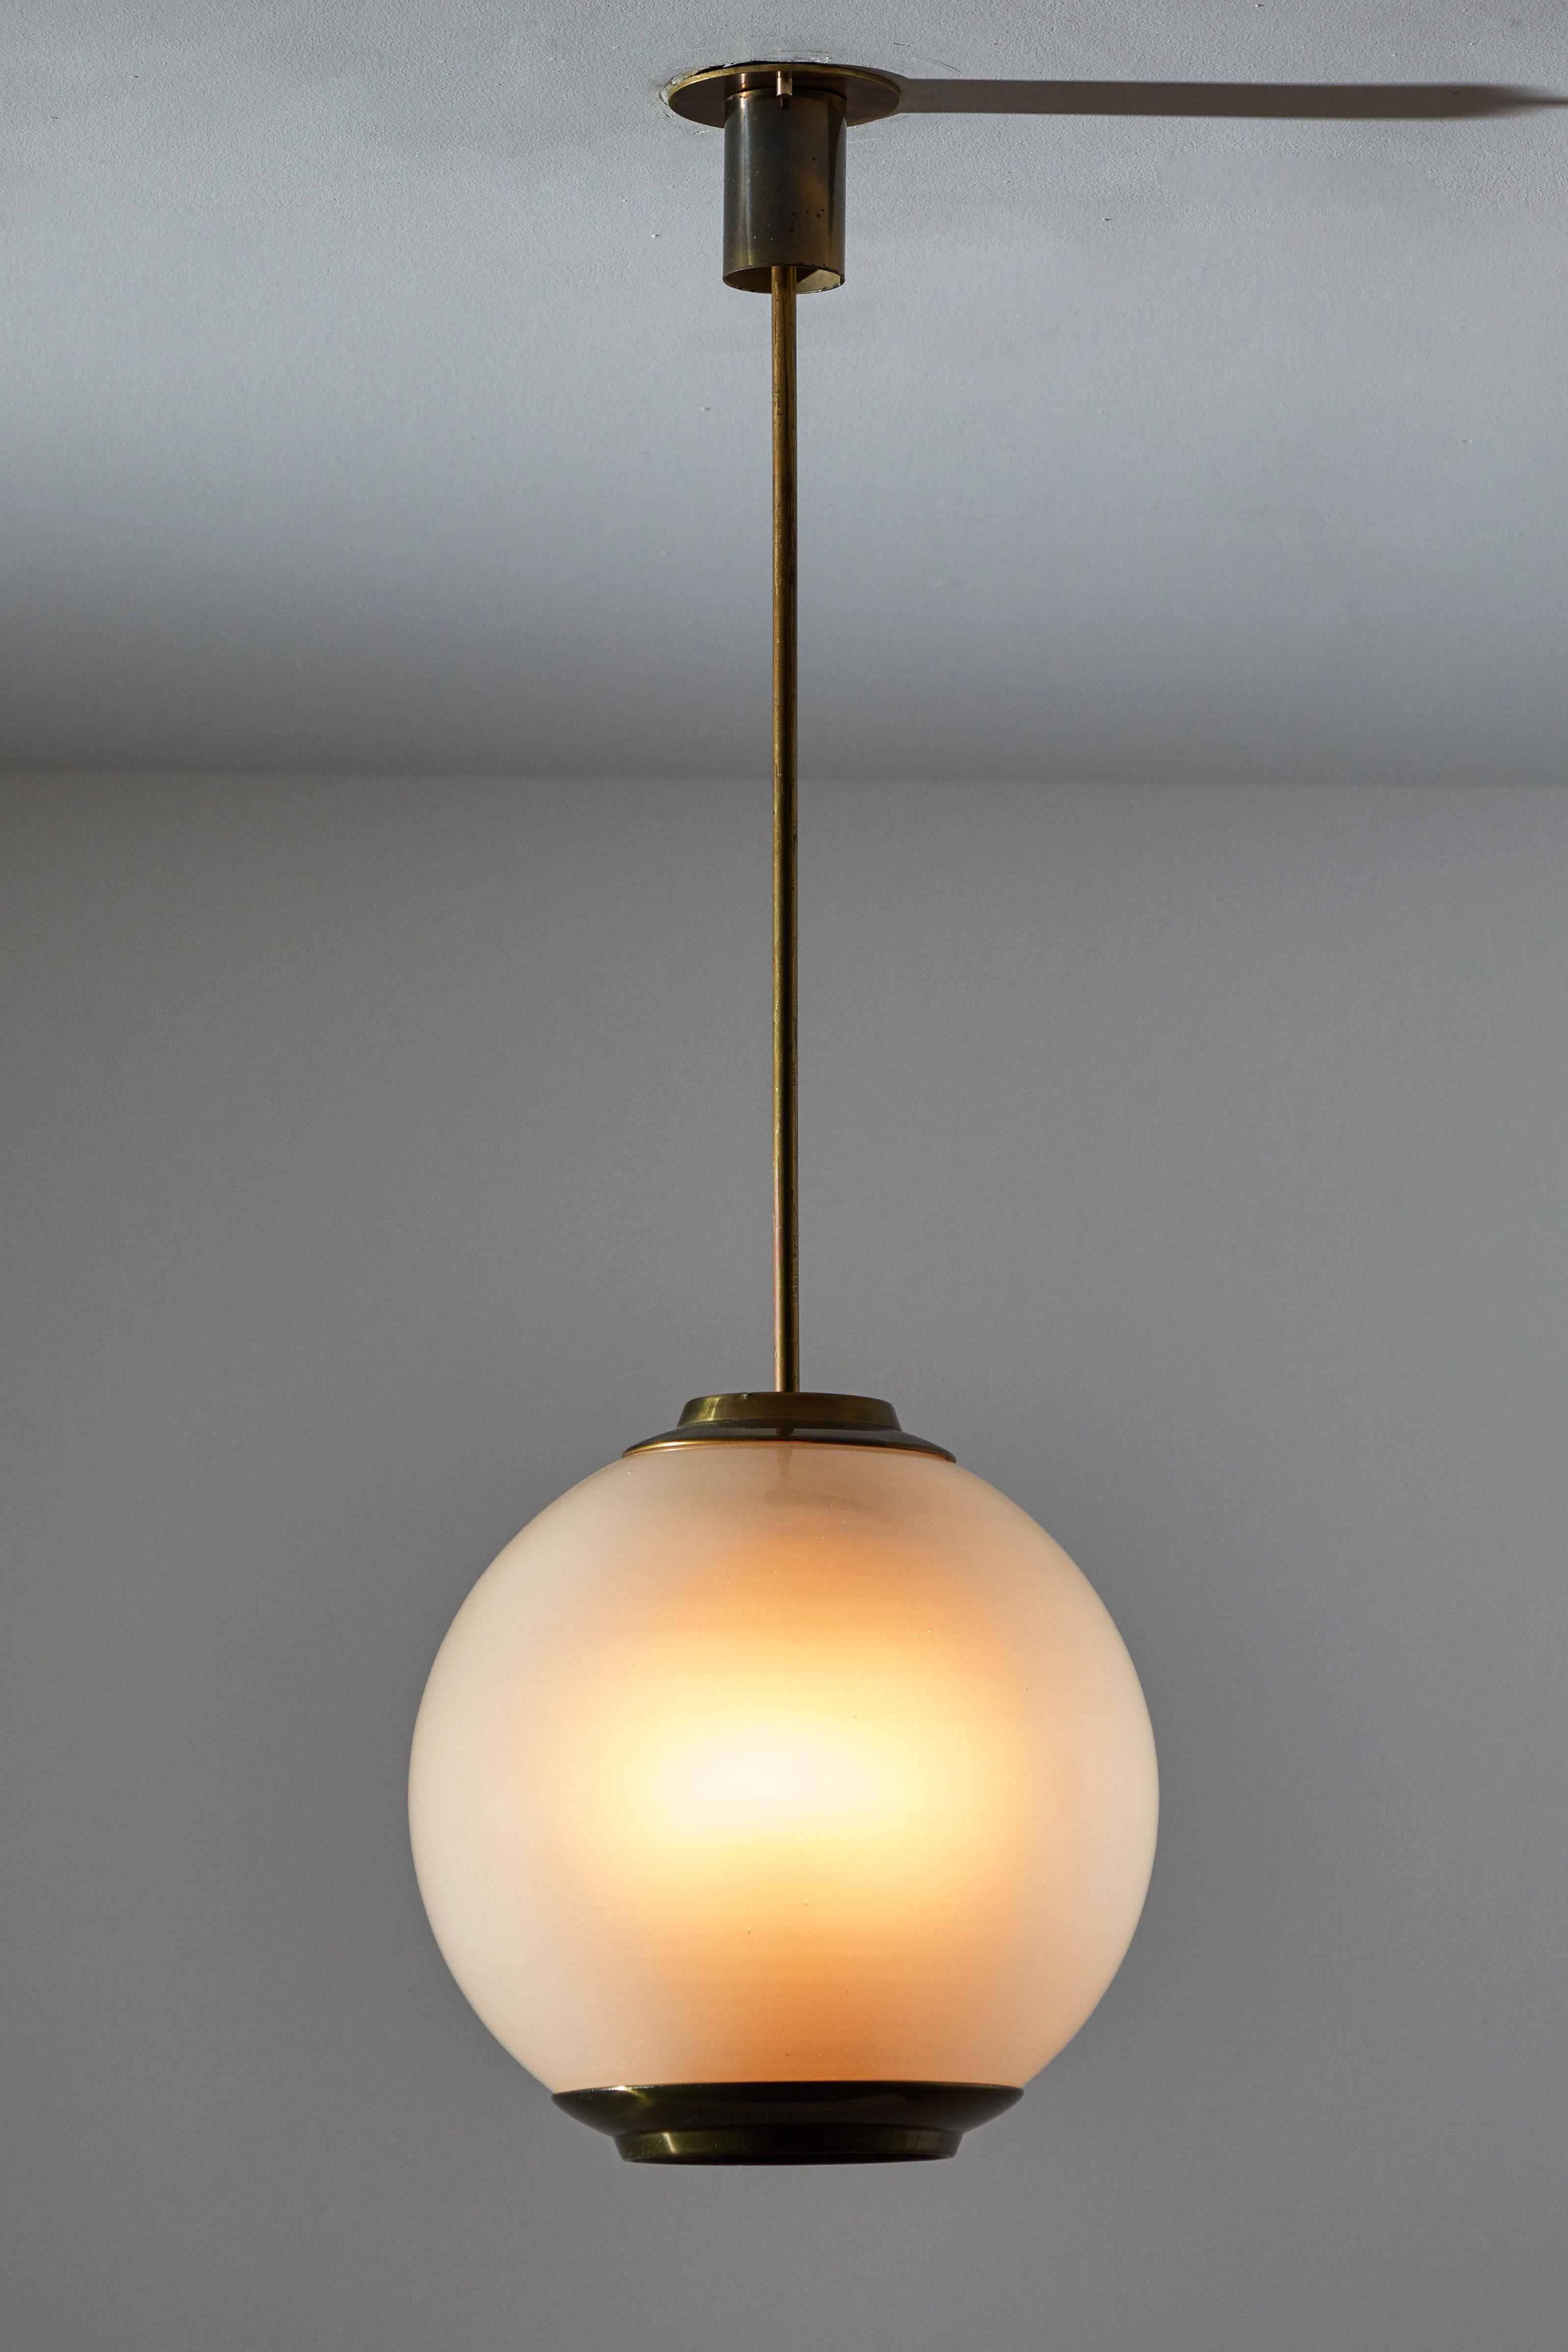 Single pendant by Caccia Dominioni for Azucena. Designed and manufactured in Italy, circa 1950s. Opaline glass diffuser, brass plated stem and canopy. Custom brass ceiling plate. Rewired for US junction boxes. This pendant takes three E27 Candelabra